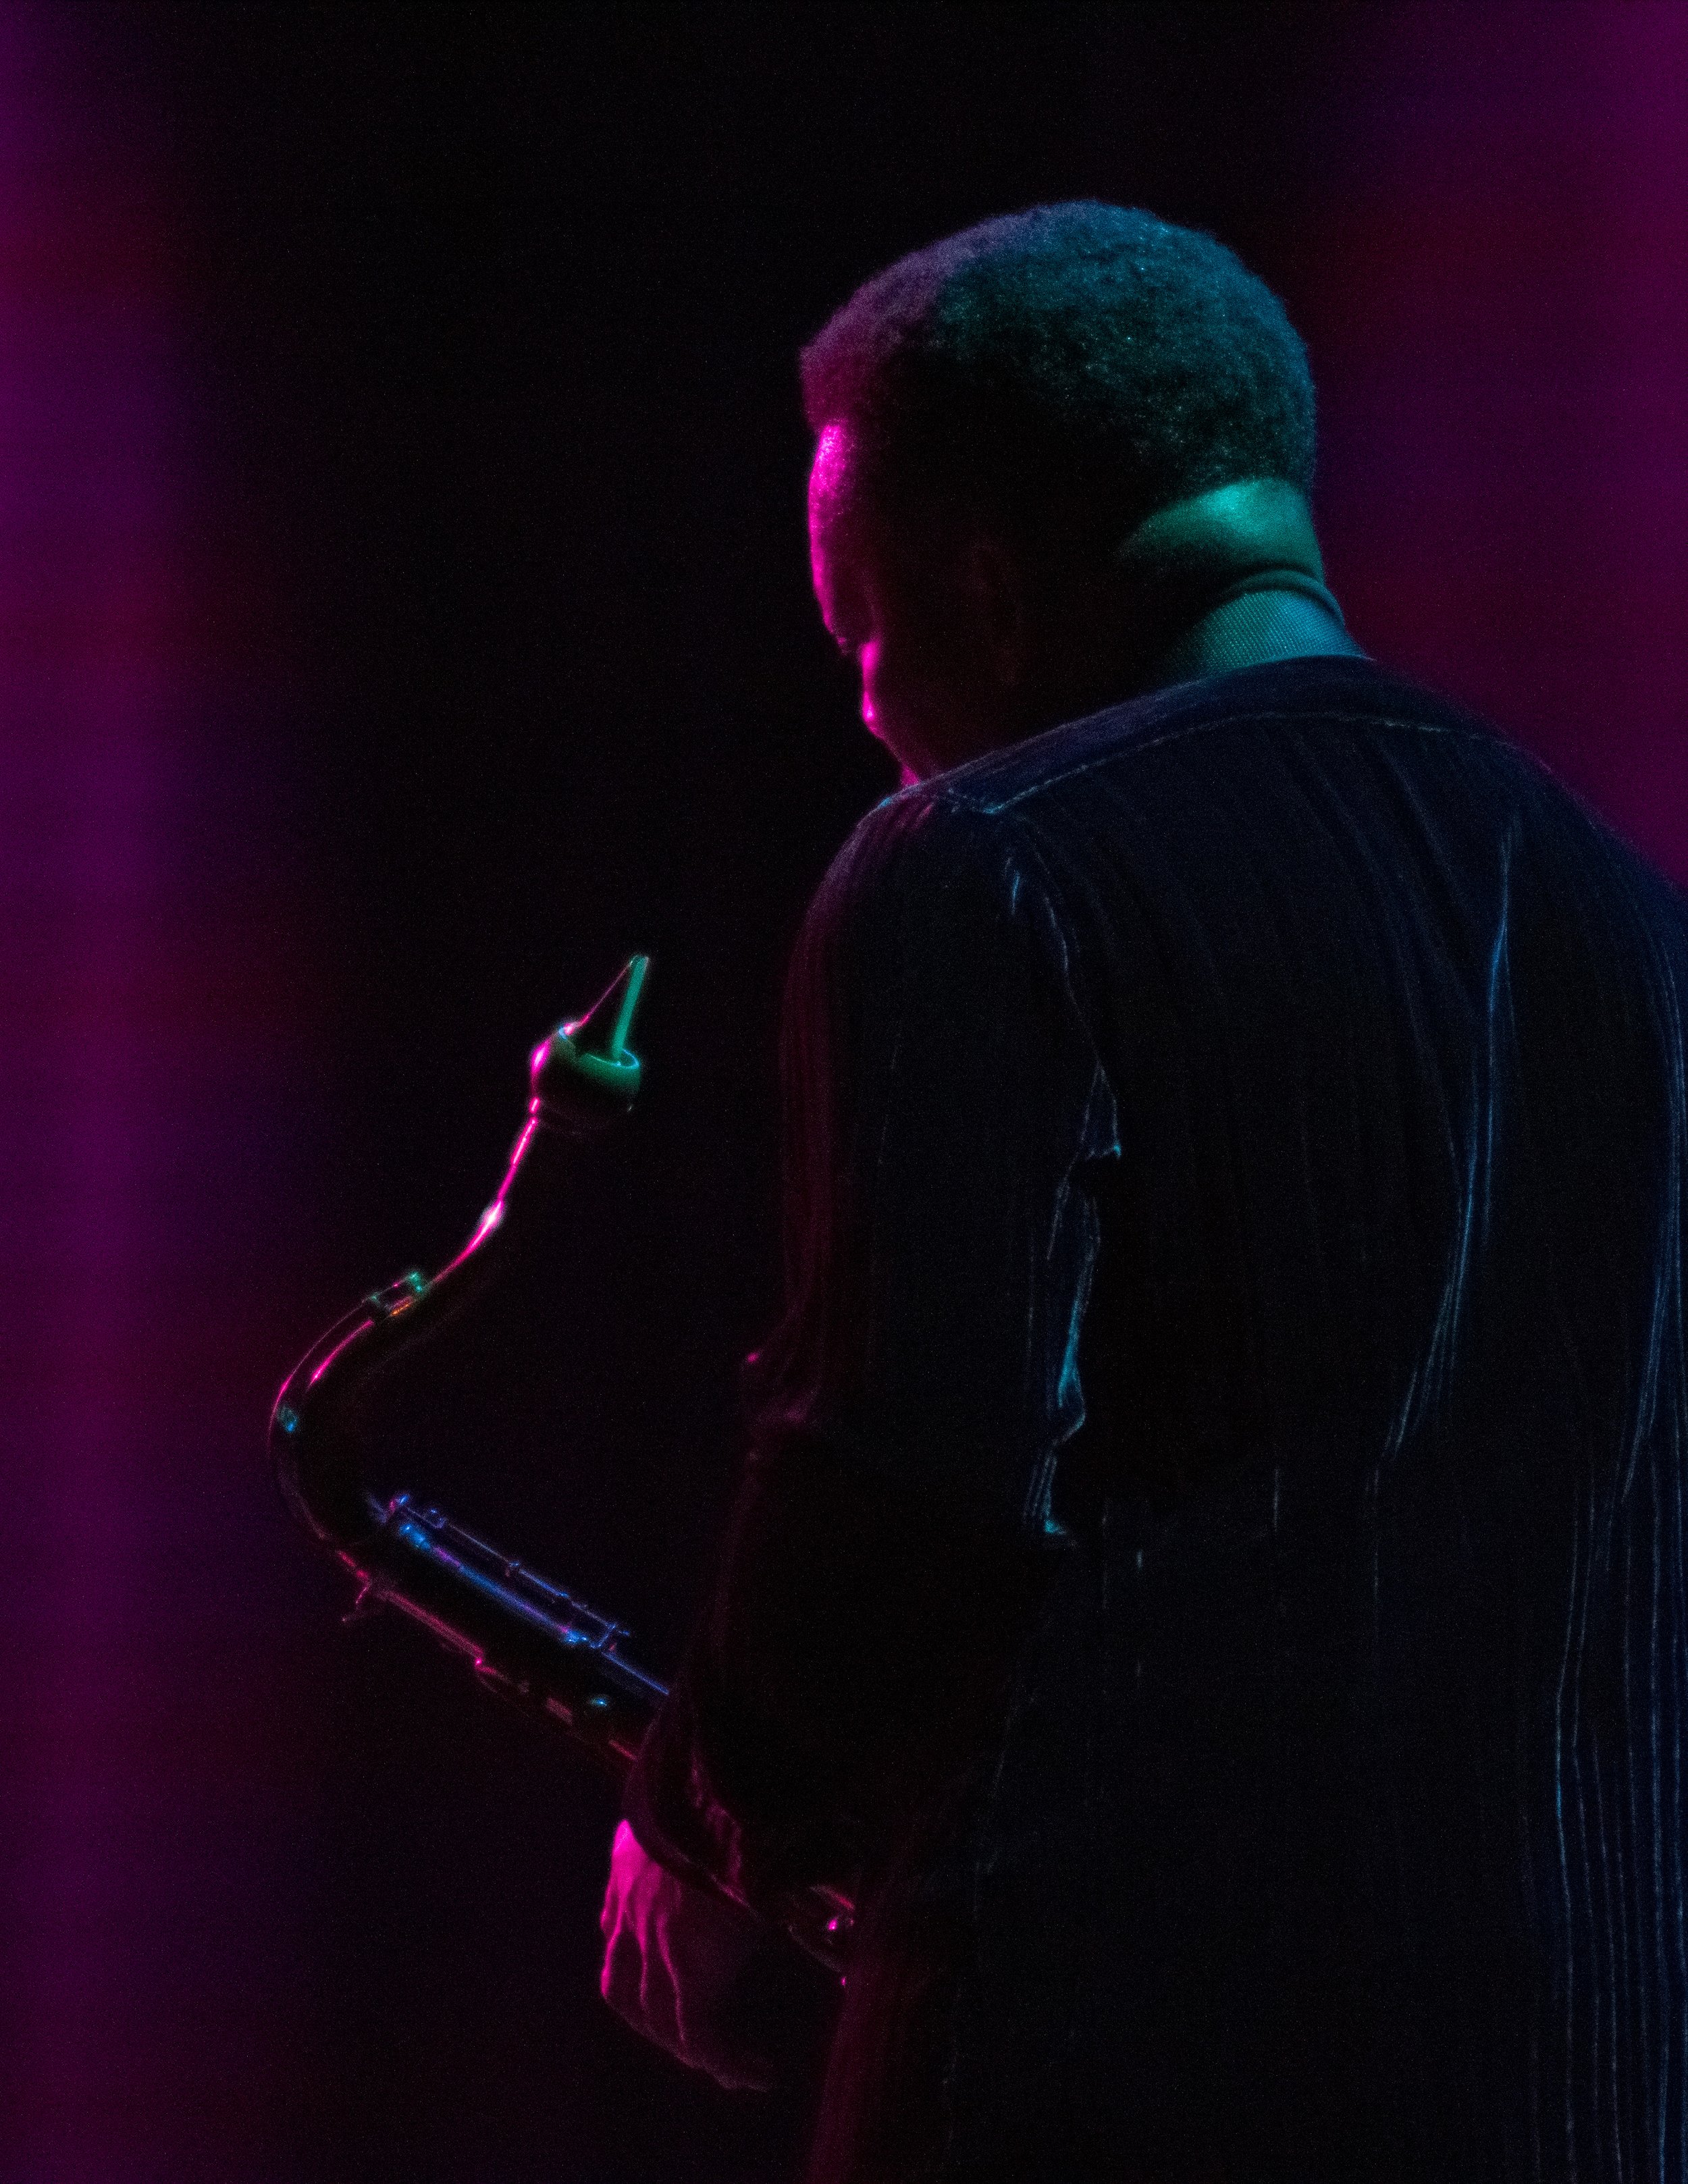  Ravi Coltrane waits to play his saxophone at the Santa Monica College Performing Arts Center Santa Monica, Calif on Friday, September 23rd 2022. It was his late father's birthday and he referred to the night as auspicious. The evening's performance 